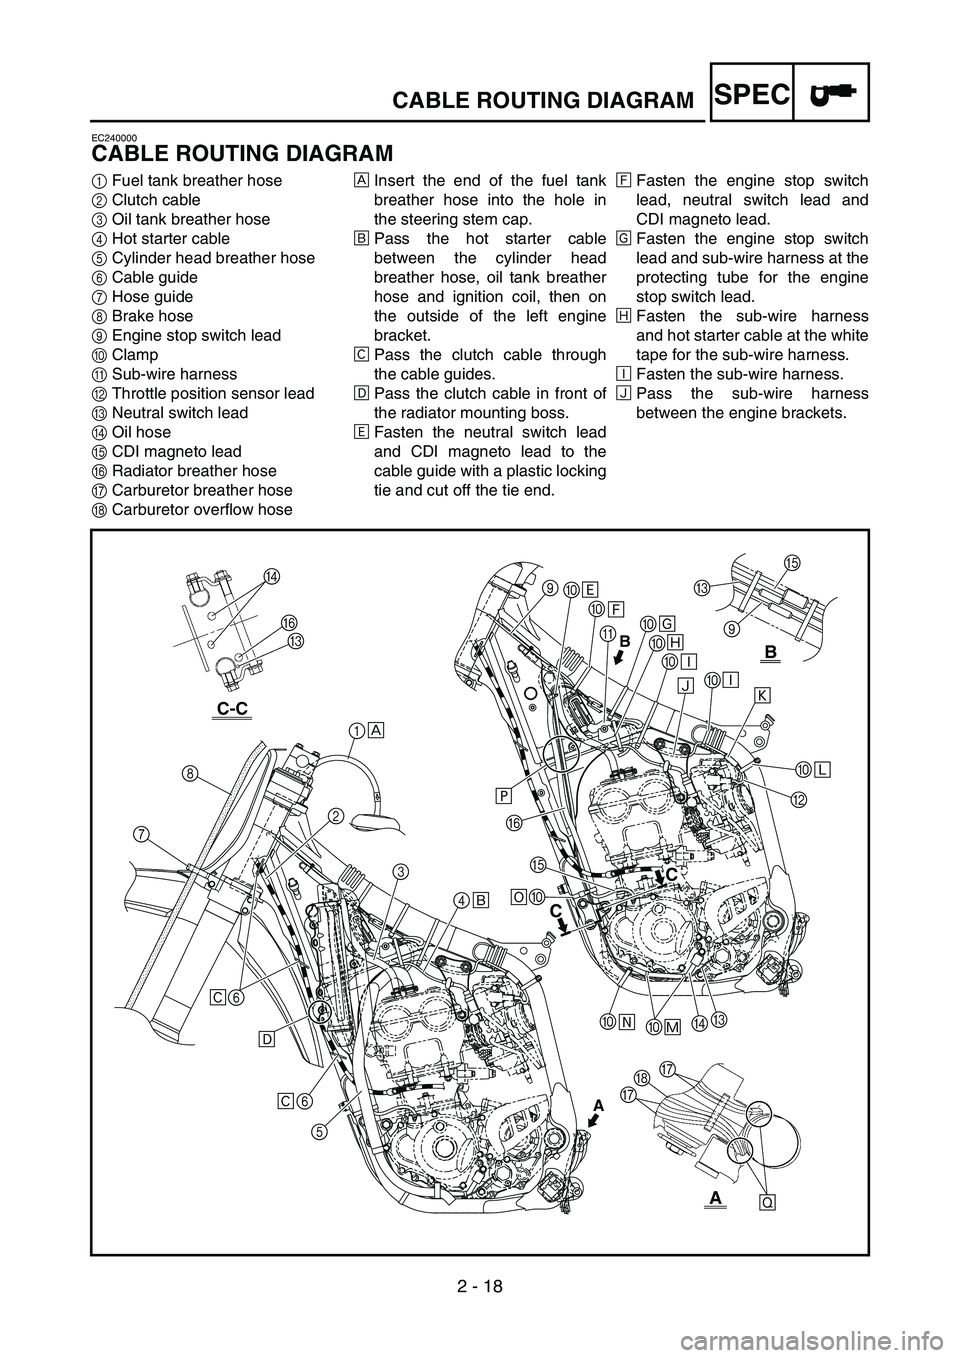 YAMAHA YZ250F 2005  Owners Manual 2 - 18
SPECCABLE ROUTING DIAGRAM
EC240000
CABLE ROUTING DIAGRAM
1Fuel tank breather hose
2Clutch cable
3Oil tank breather hose
4Hot starter cable
5Cylinder head breather hose
6Cable guide 
7Hose guide